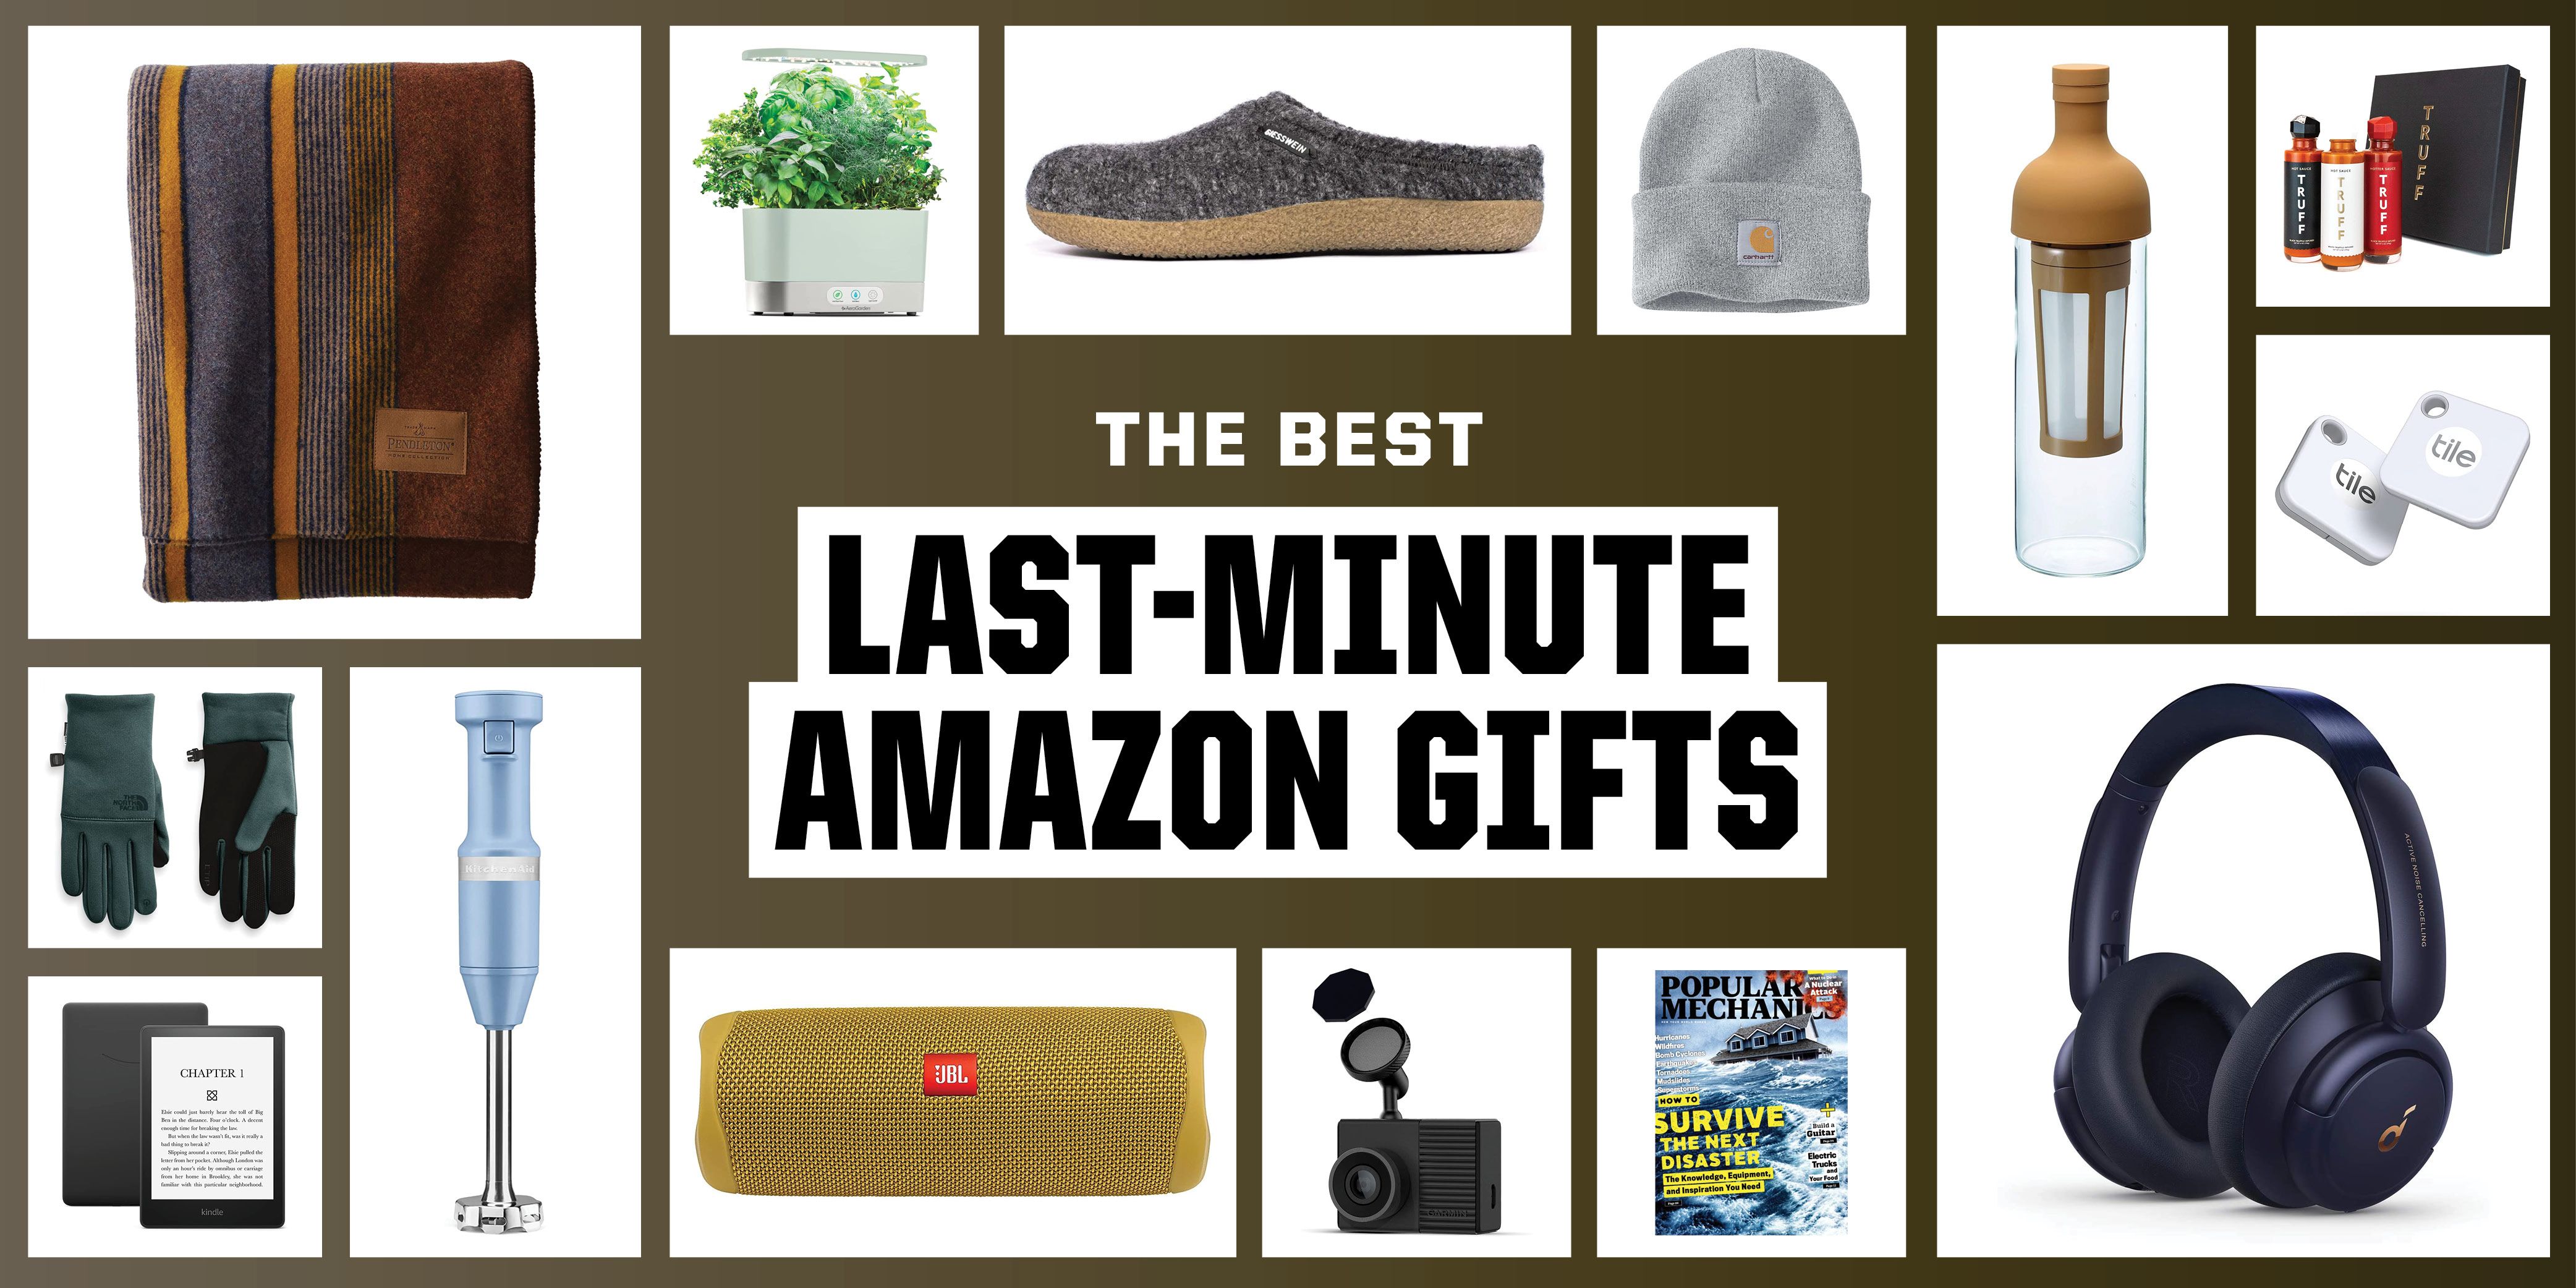 20 Best Work From Home in 2023 - Best WFH Gifts